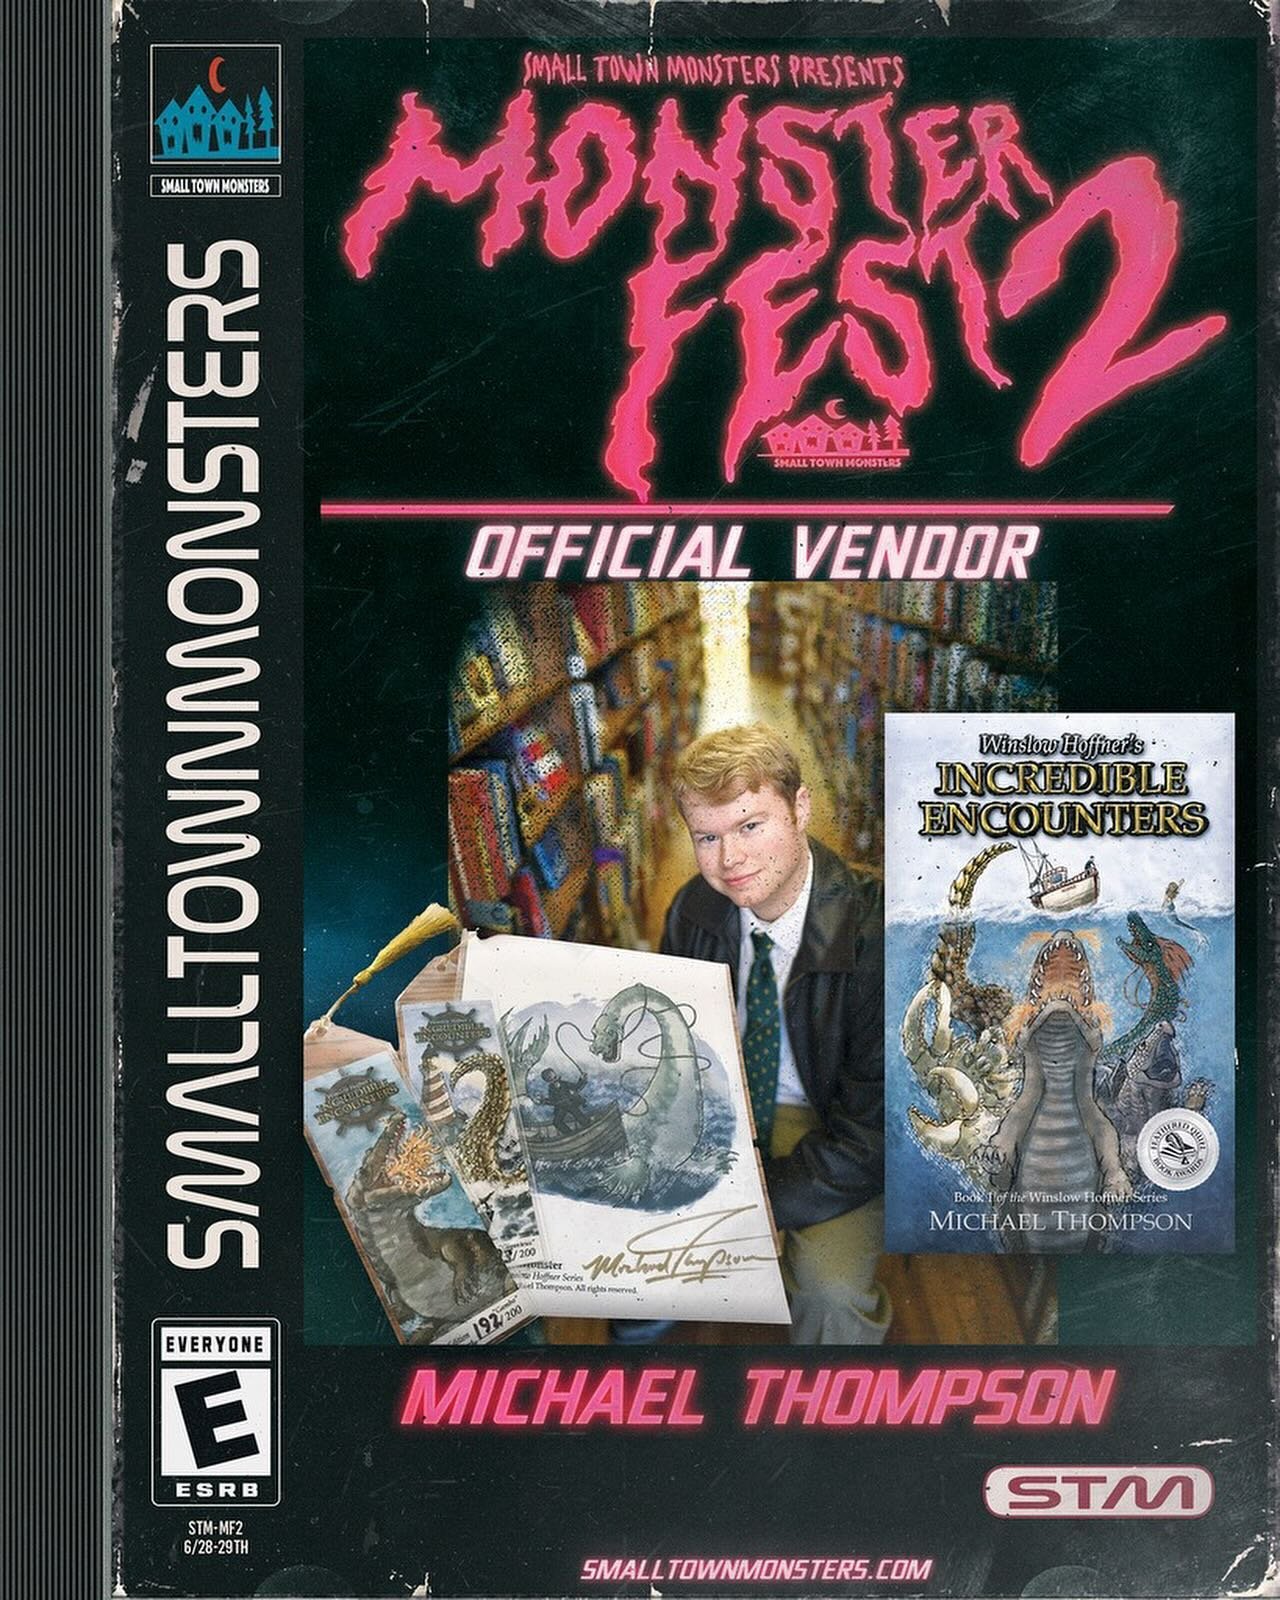 🚨 VENDOR ANNOUNCEMENTS🚨 Monster Fest 2 is proud to welcome Open Minds Media, NMR Studios and author Michael Thompson! Get your tickets at stmmonsterfest.com and join us on 6/28 &amp; 6/29 in Canton OH. Get excited - it&rsquo;s almost here! 

#ogopo